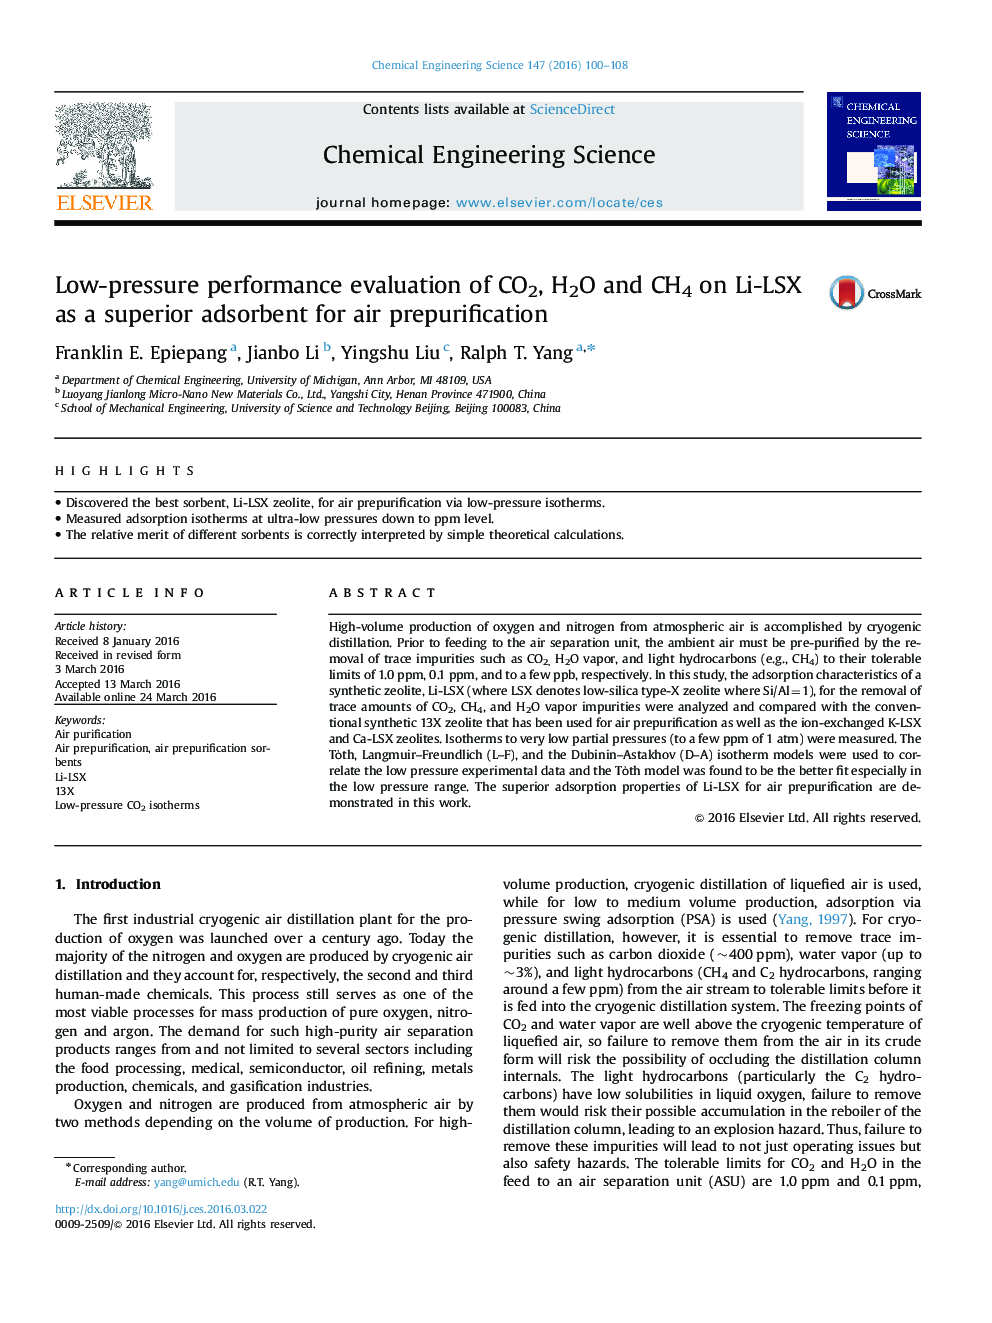 Low-pressure performance evaluation of CO2, H2O and CH4 on Li-LSX as a superior adsorbent for air prepurification